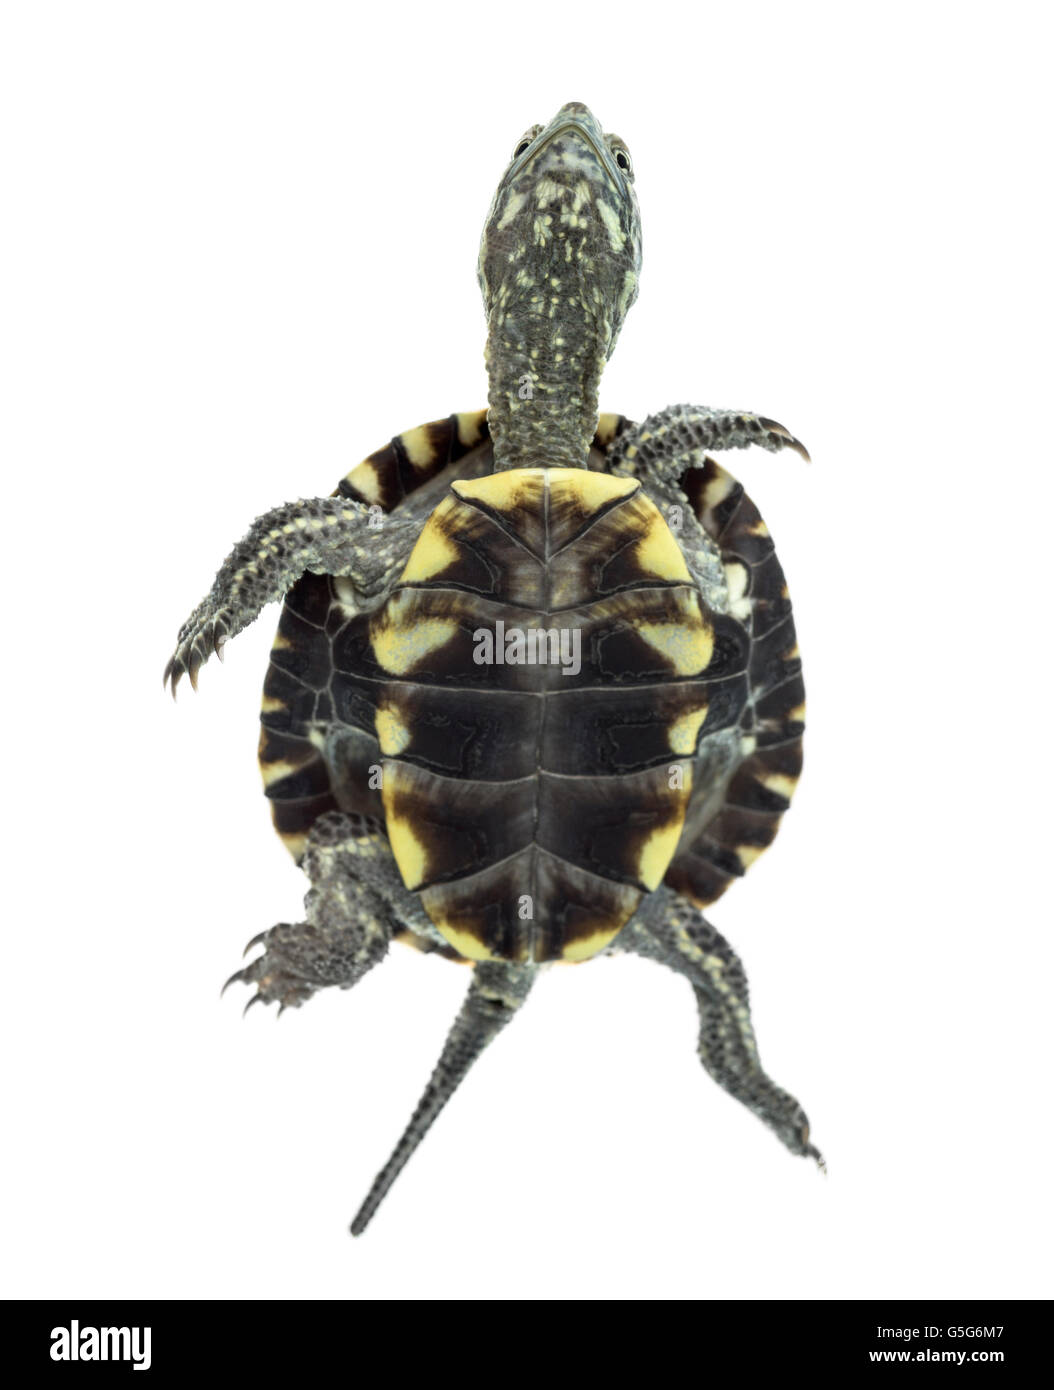 European pond turtle (1 year old), Emys orbicularis, swimming in front of a white background Stock Photo